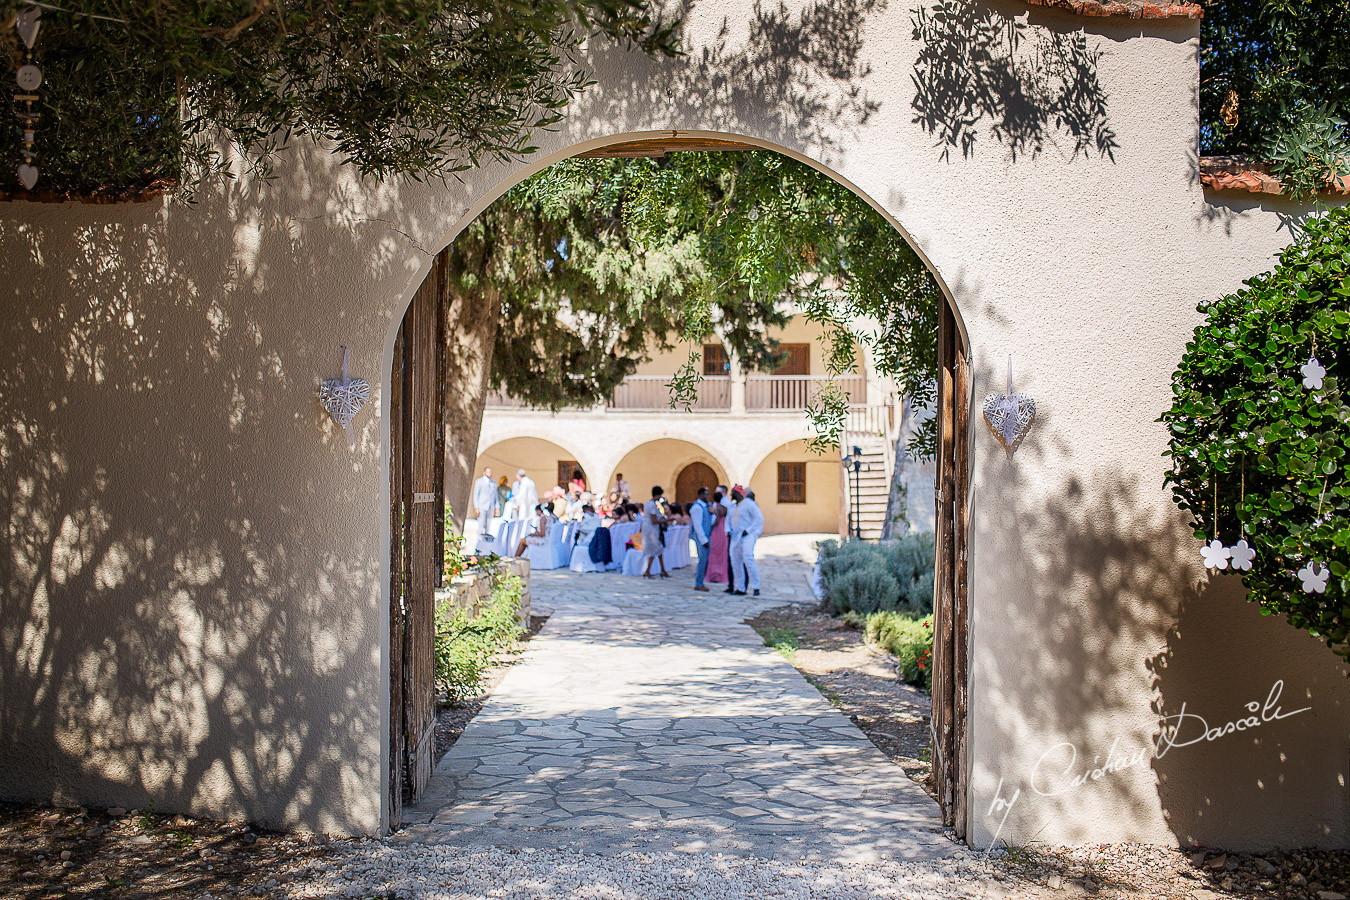 Wedding guests photographed through the Minthis Hills monastery gate, moments captured at a wedding at Minthis Hills in Cyprus, by Cristian Dascalu.